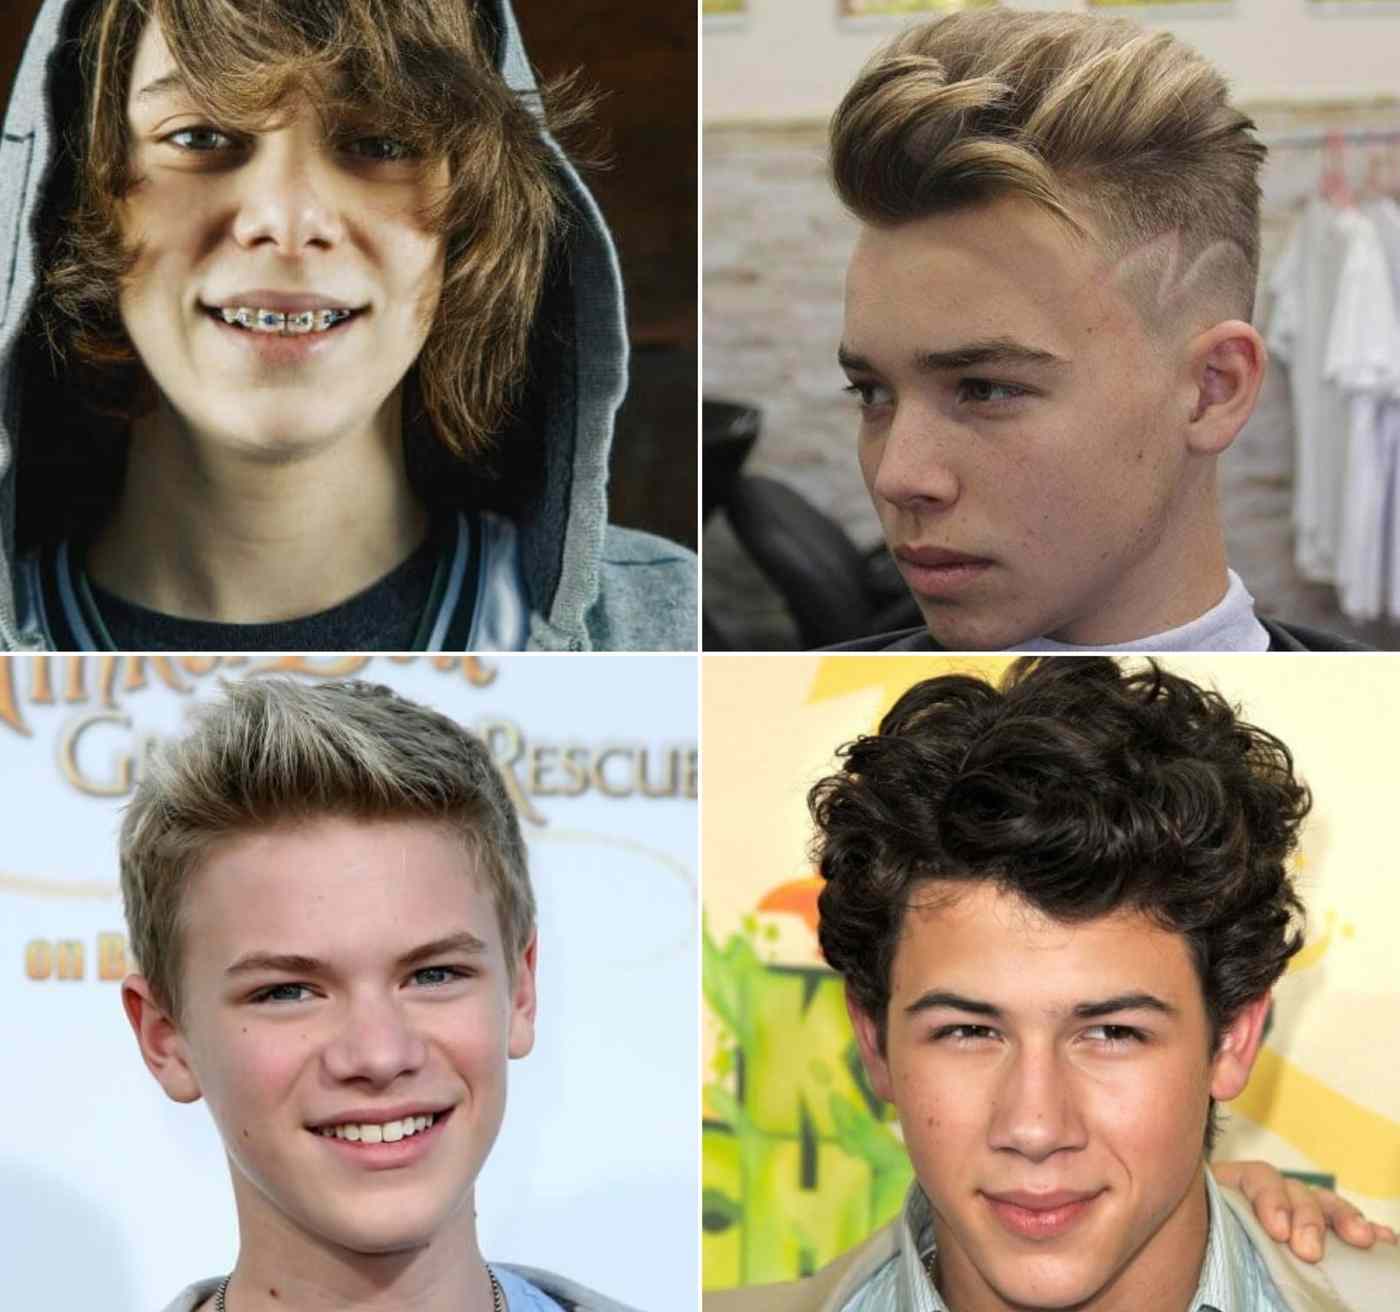 Hairstyles for boys from 12 long, medium or short haircuts with these ideas